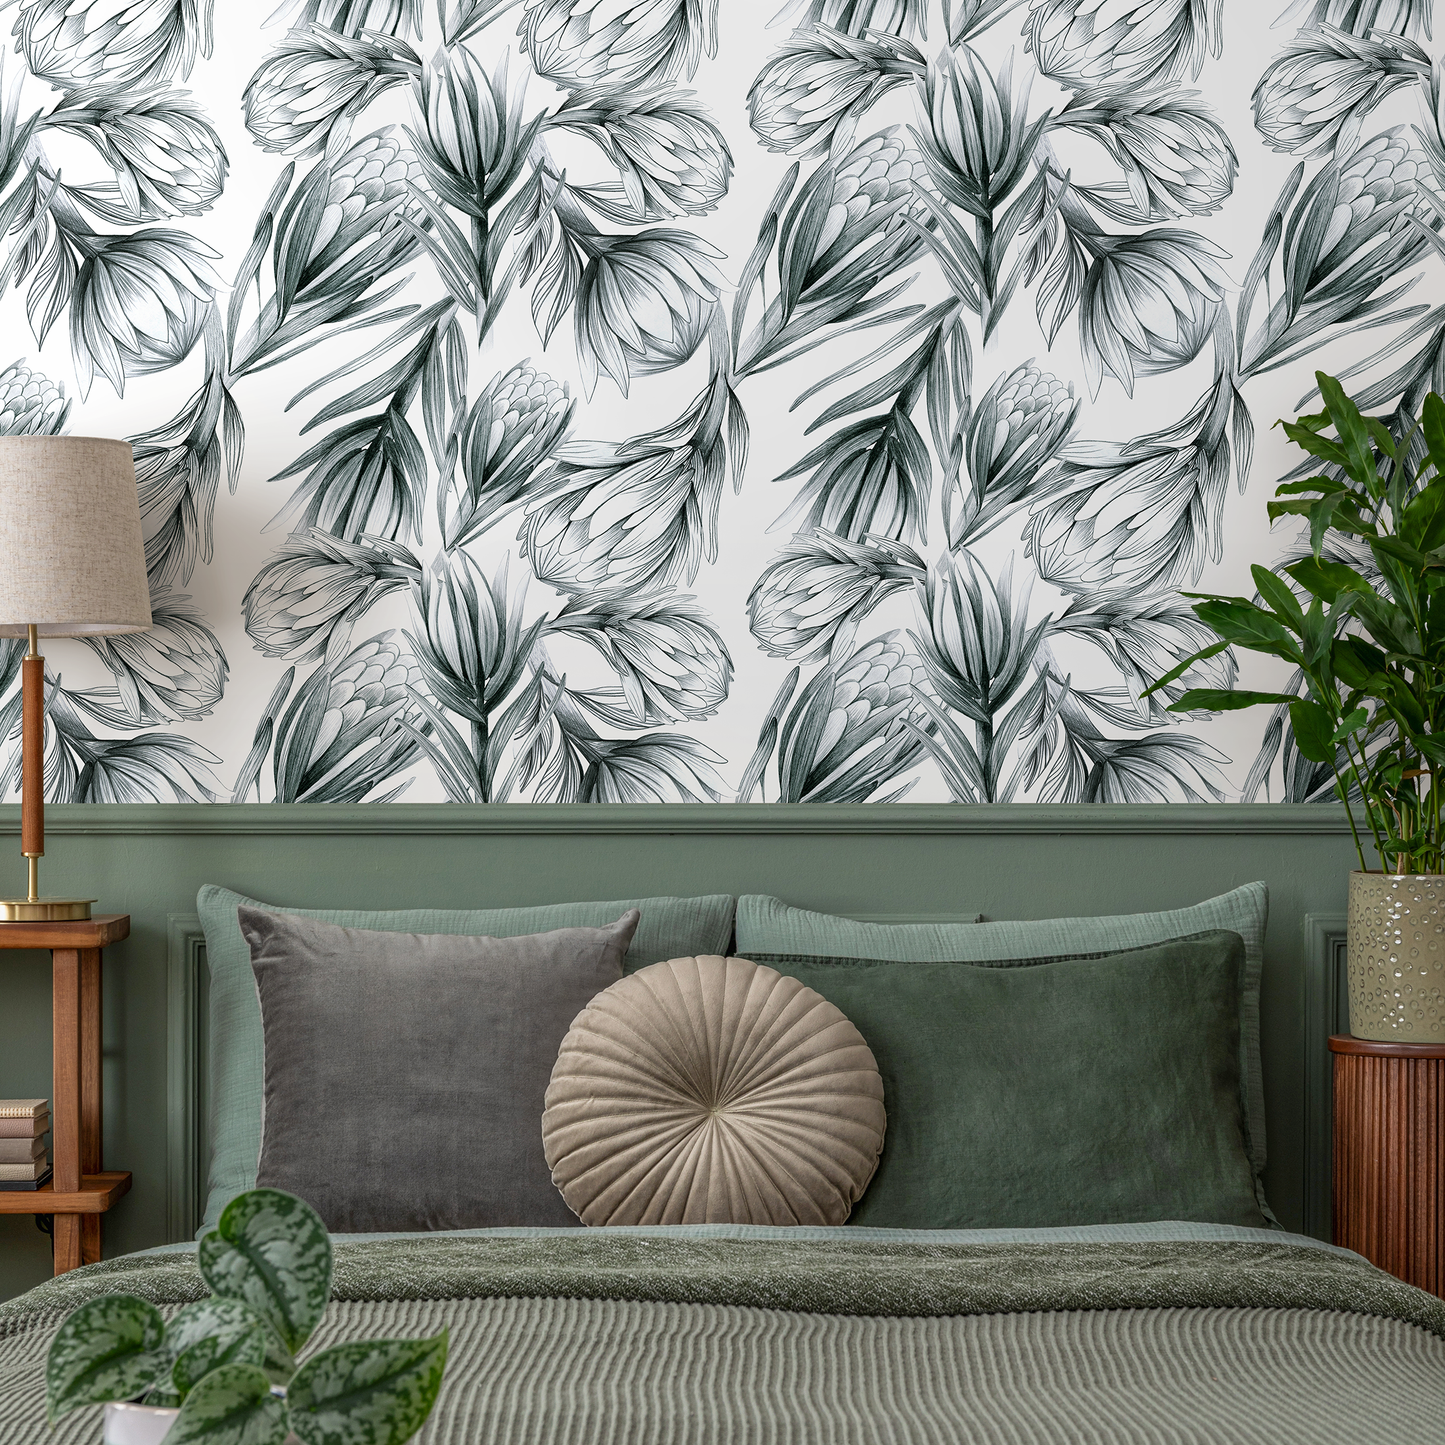 Floral Botanical Wallpaper Vintage Wallpaper Peel and Stick and Traditional Wallpaper - B025